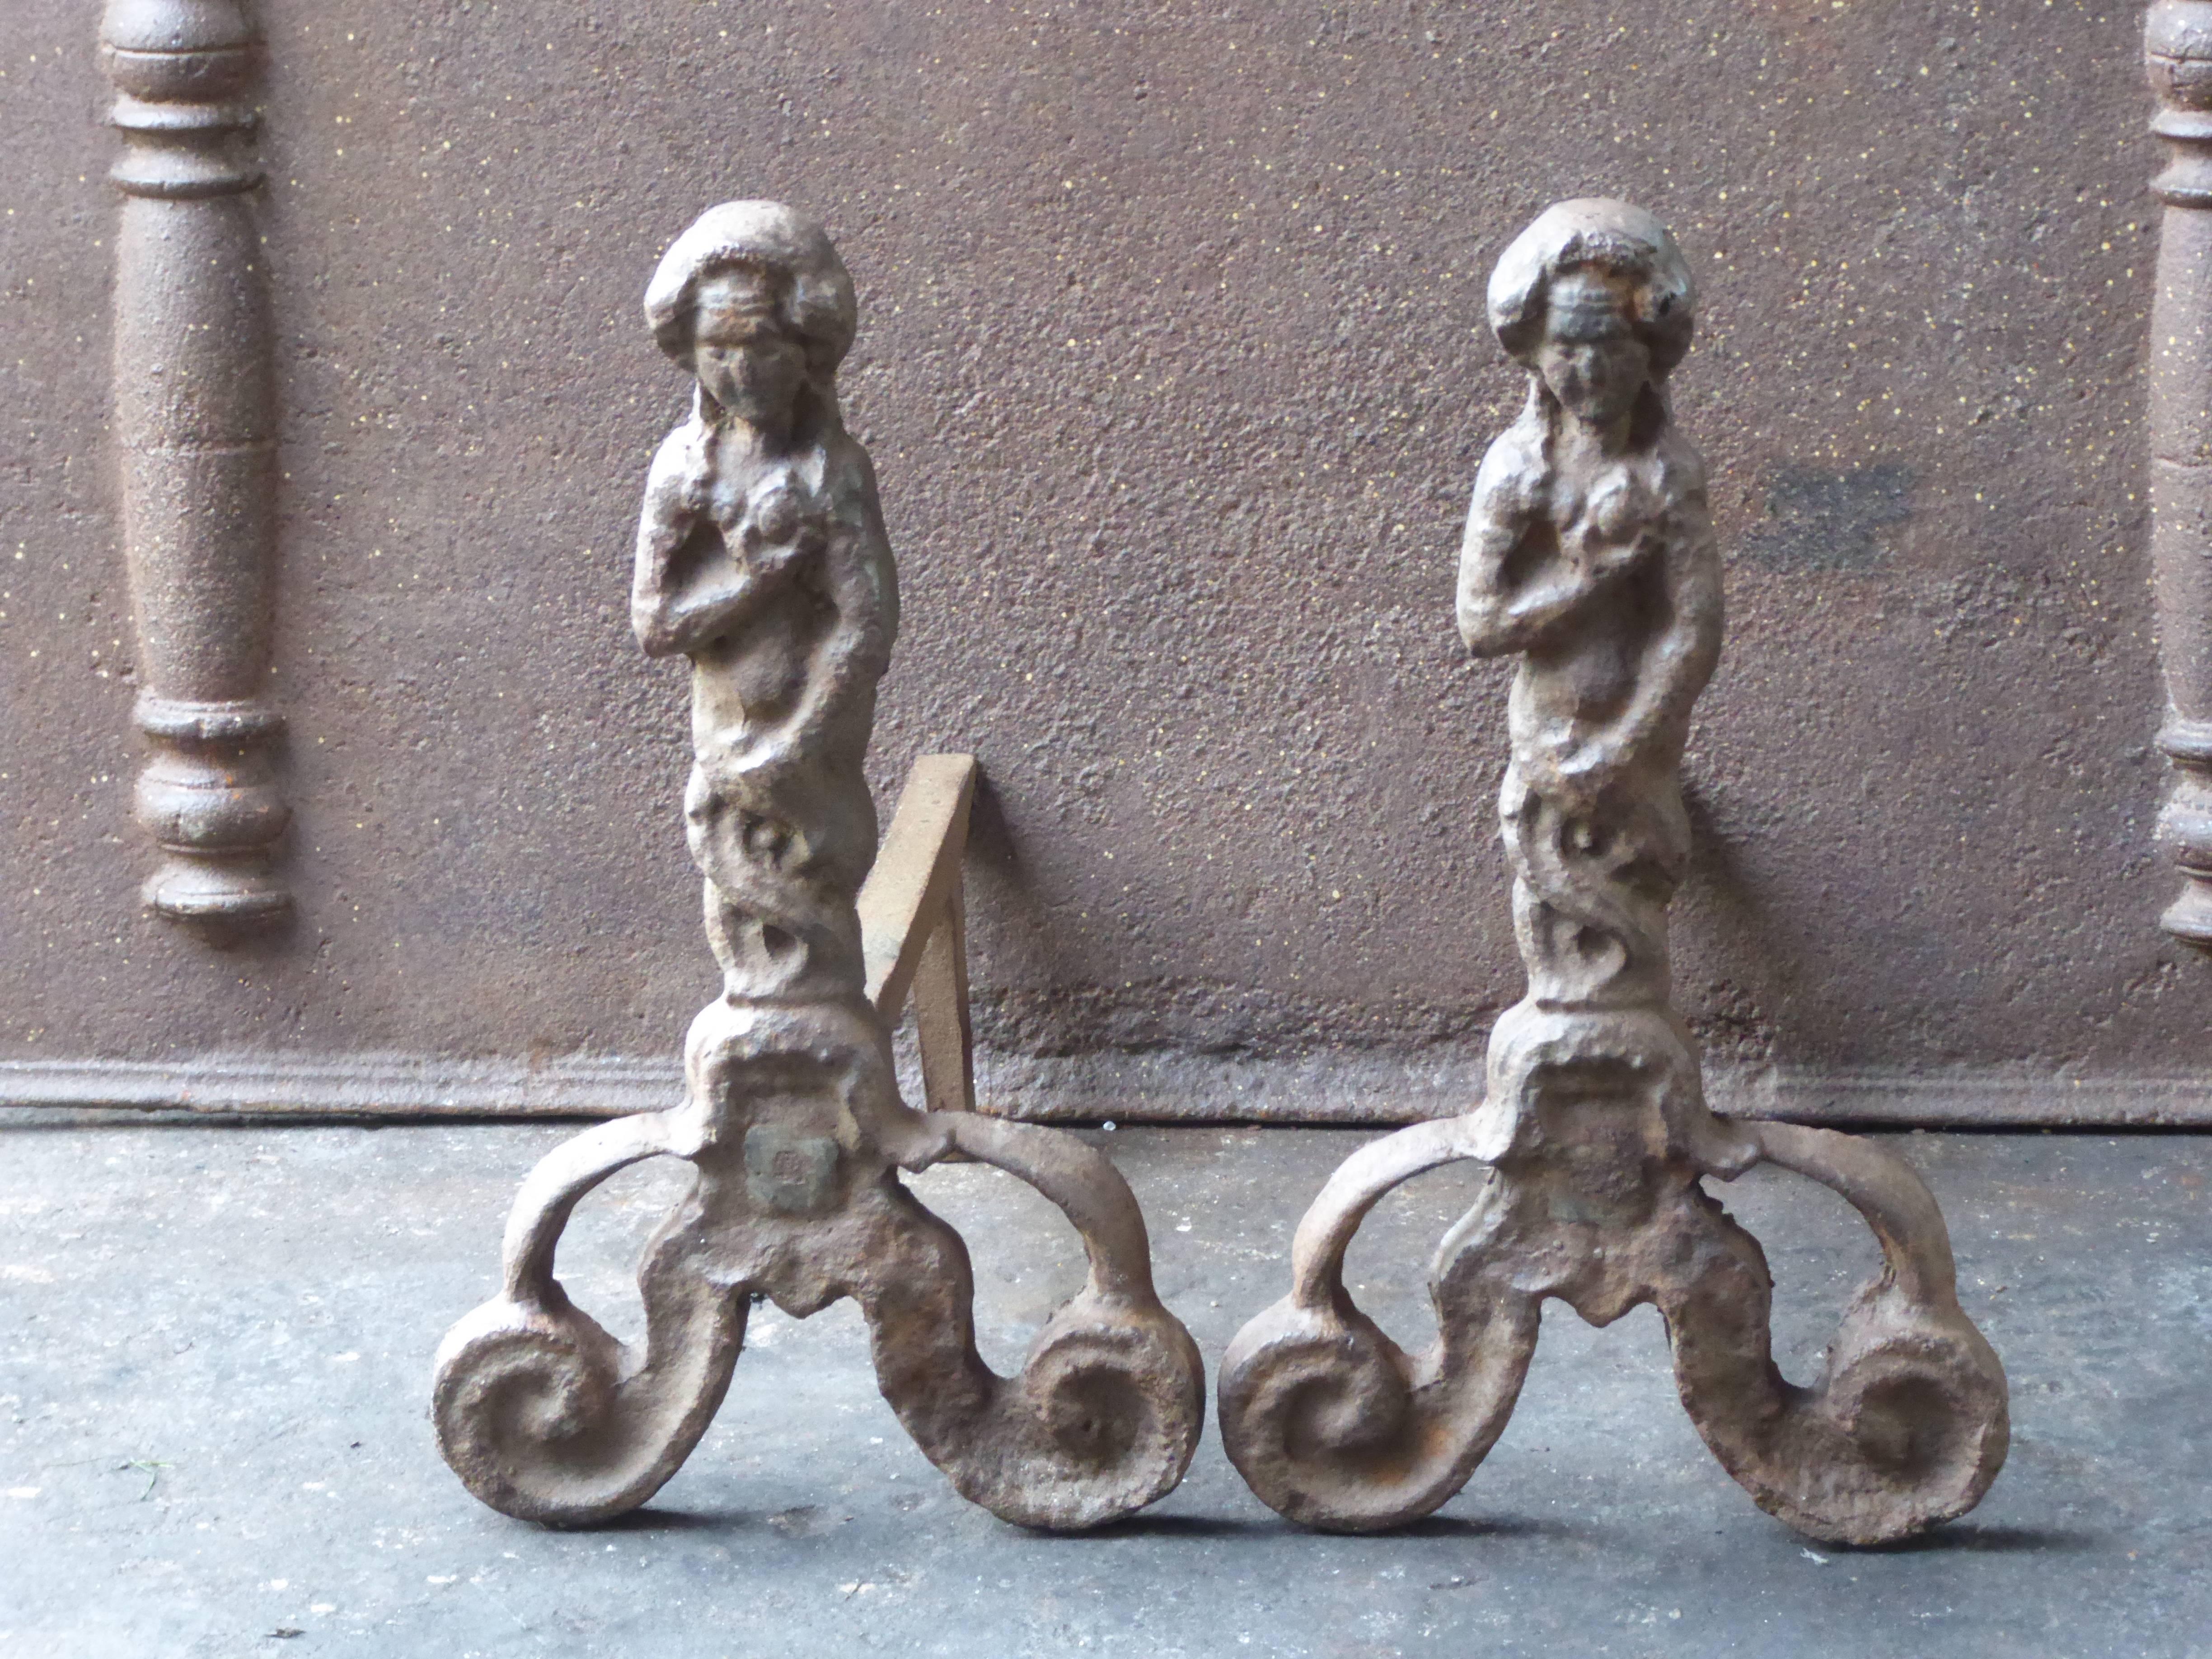 Beautiful English Arts & Crafts andirons made of cast iron. The condition is good.

